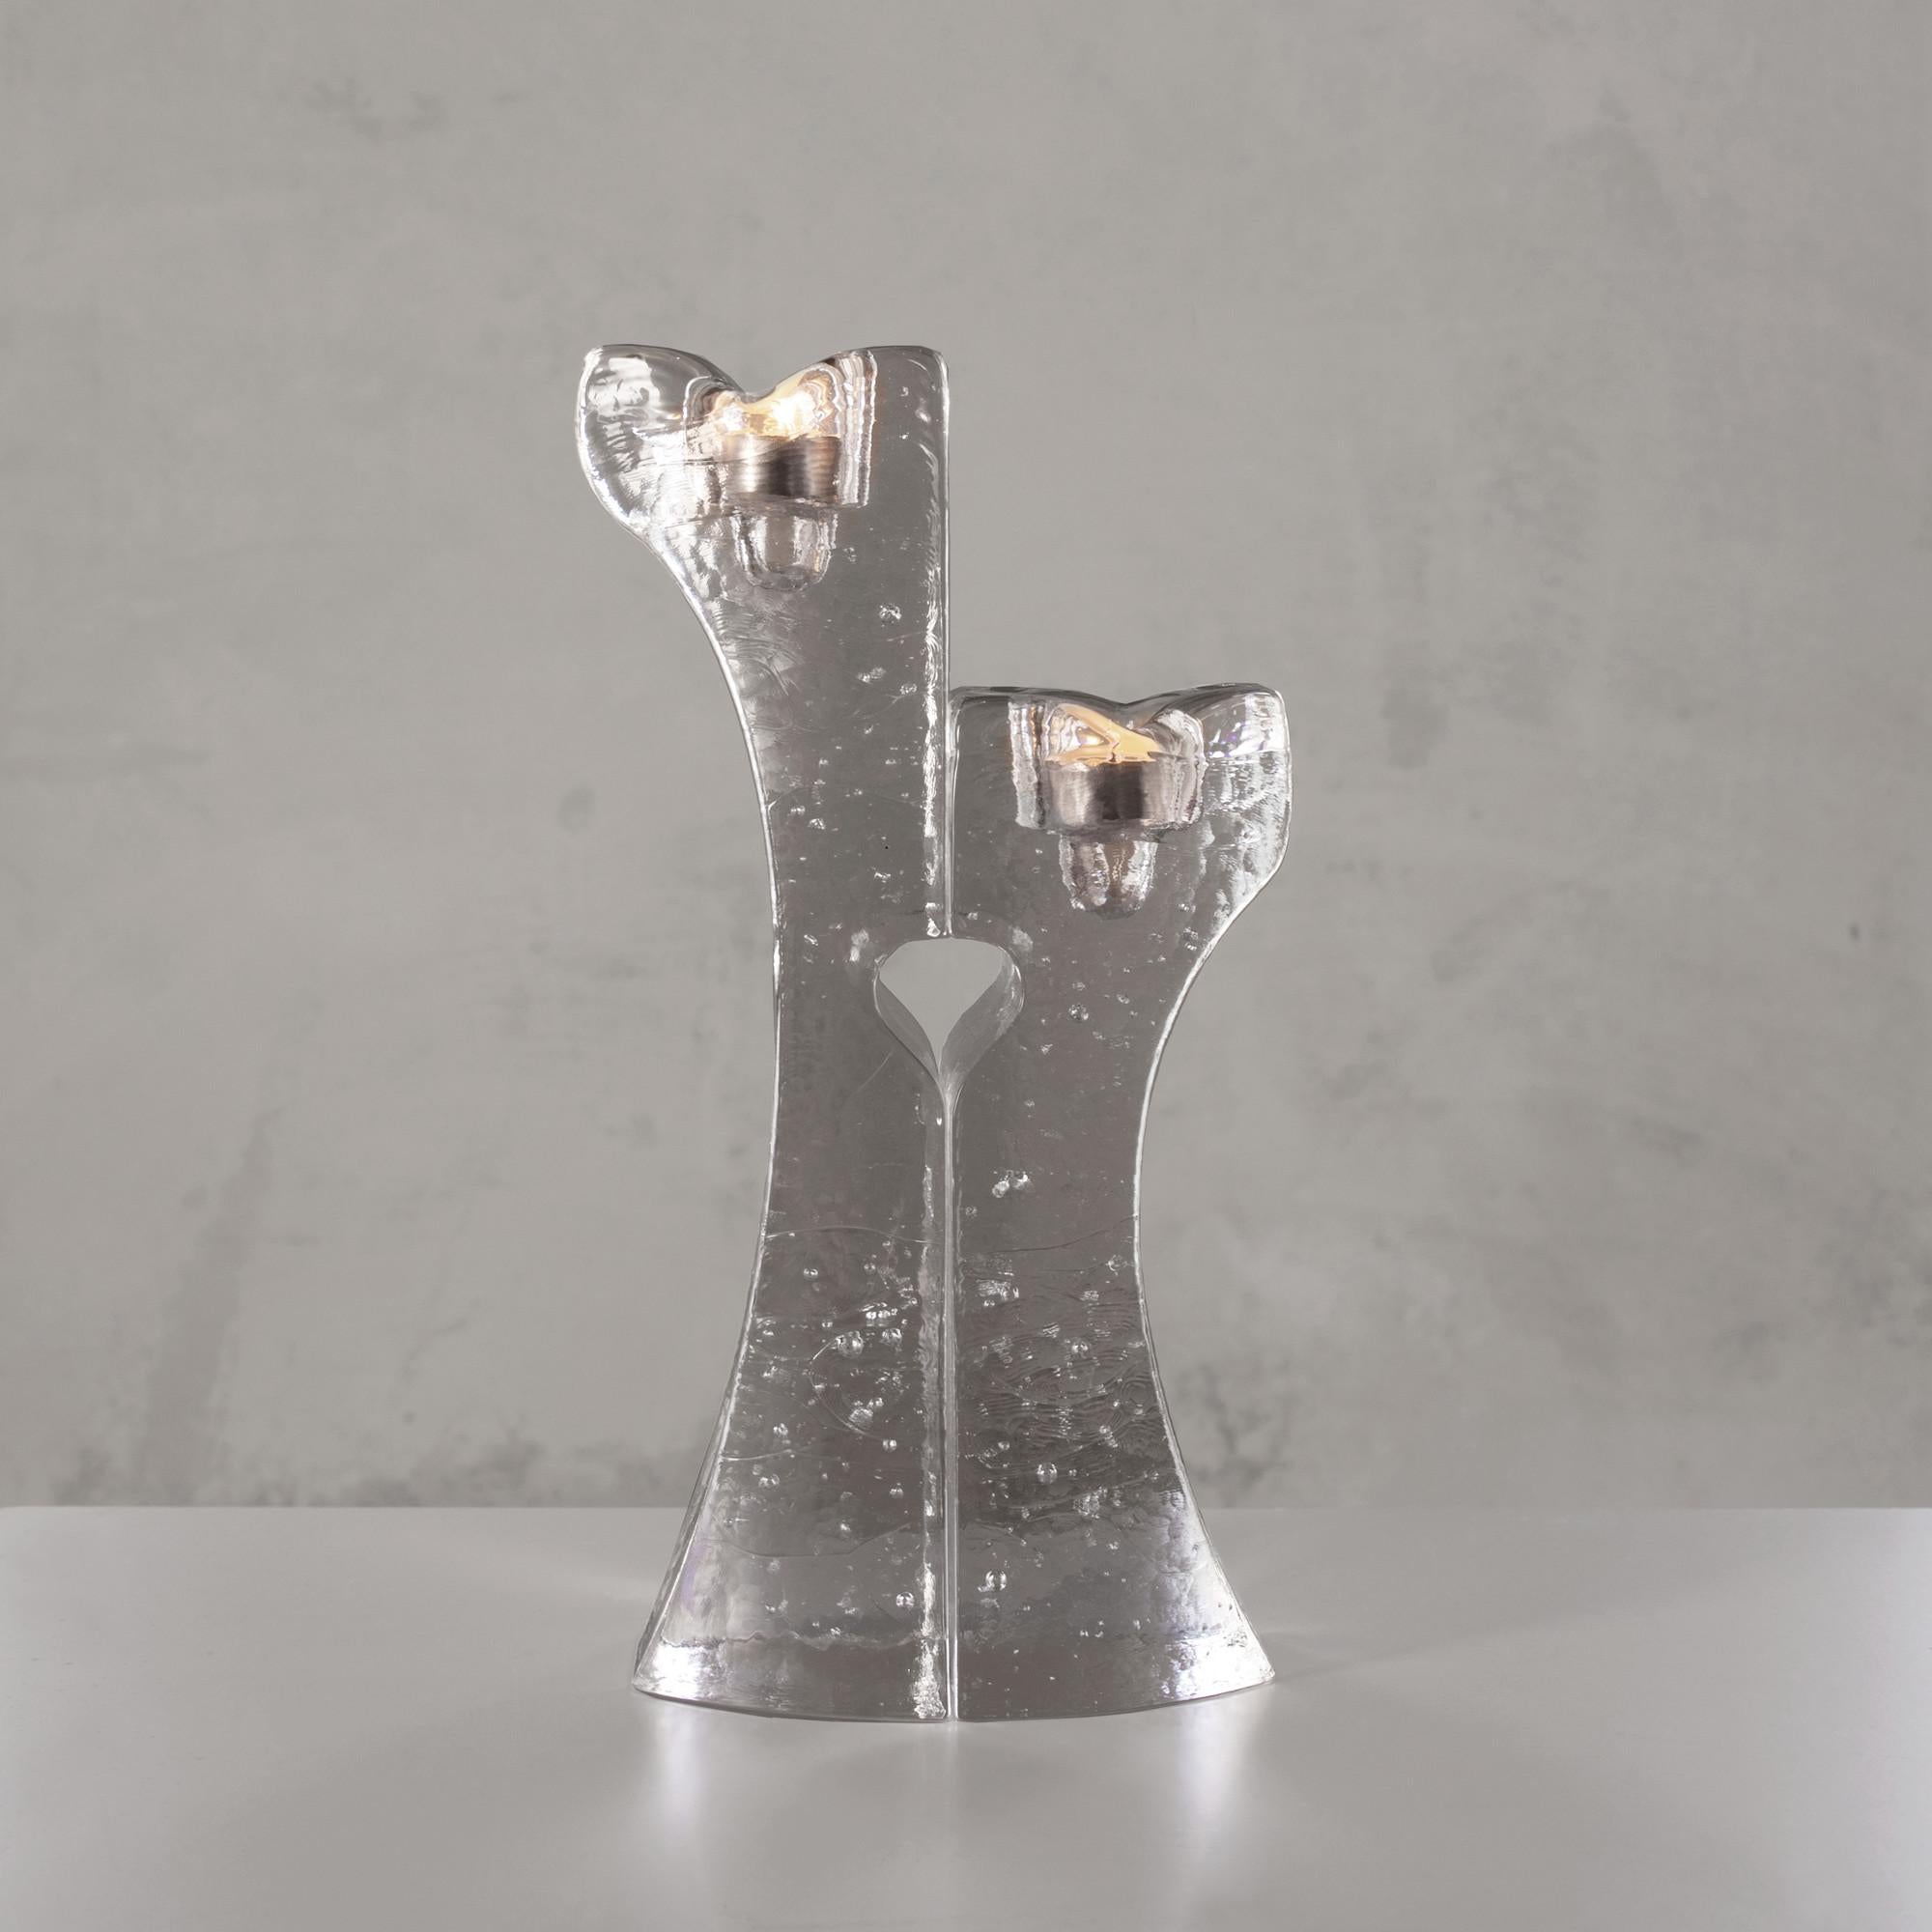 Stay connected with your inner self, and create a cozy mood with this candlestick holder from Kosta Boda. Connect consists of two separate candle holders that forms a heart in the middle when put together. It's a cool item that makes a perfect gift